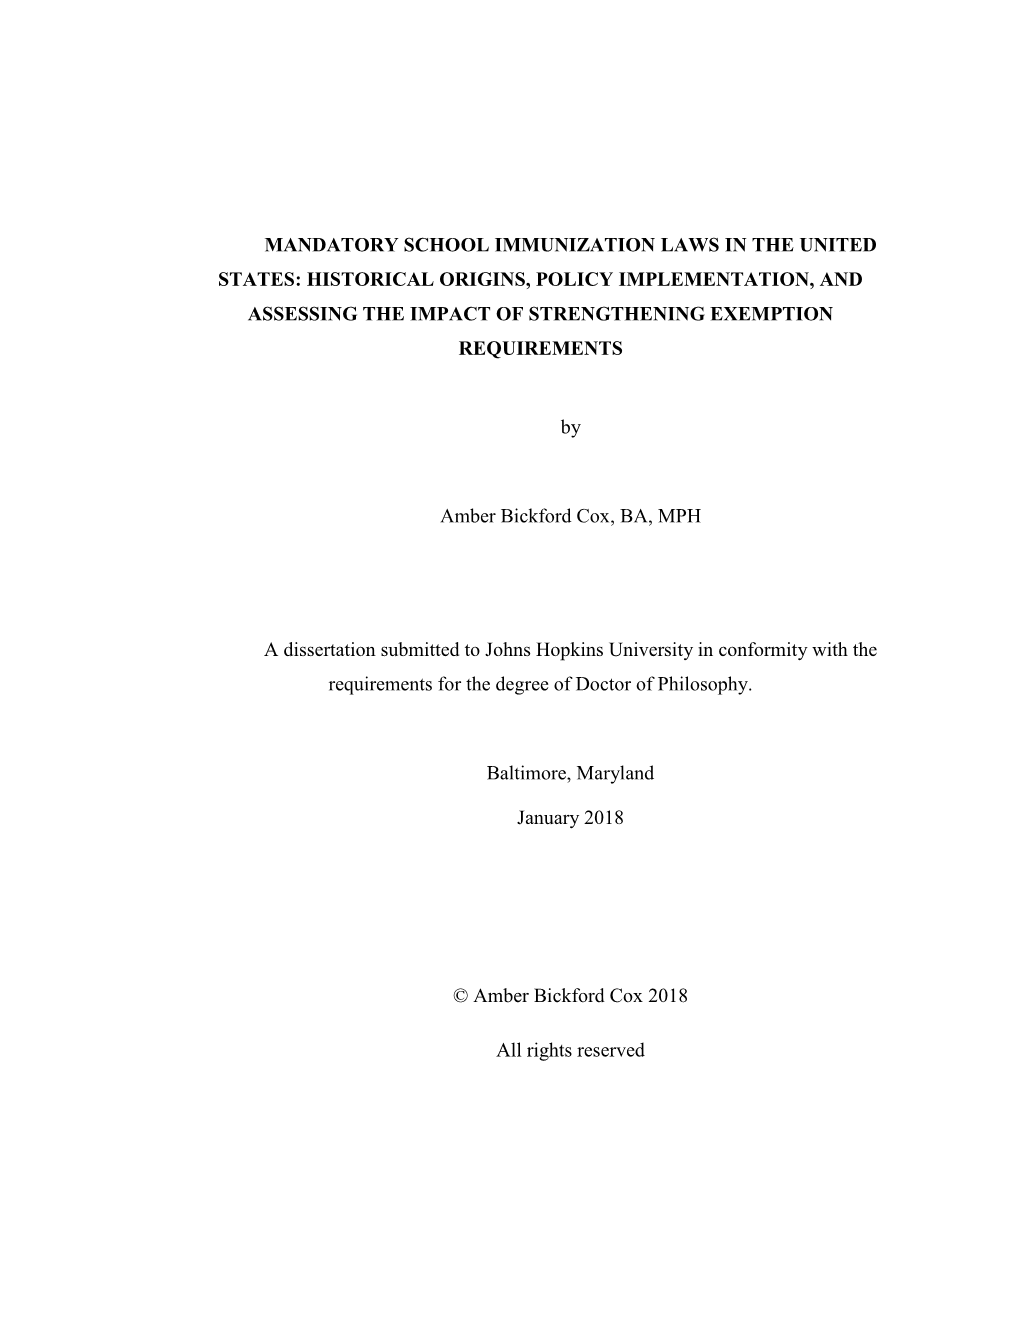 Mandatory School Immunization Laws in the United States: Historical Origins, Policy Implementation, and Assessing the Impact of Strengthening Exemption Requirements